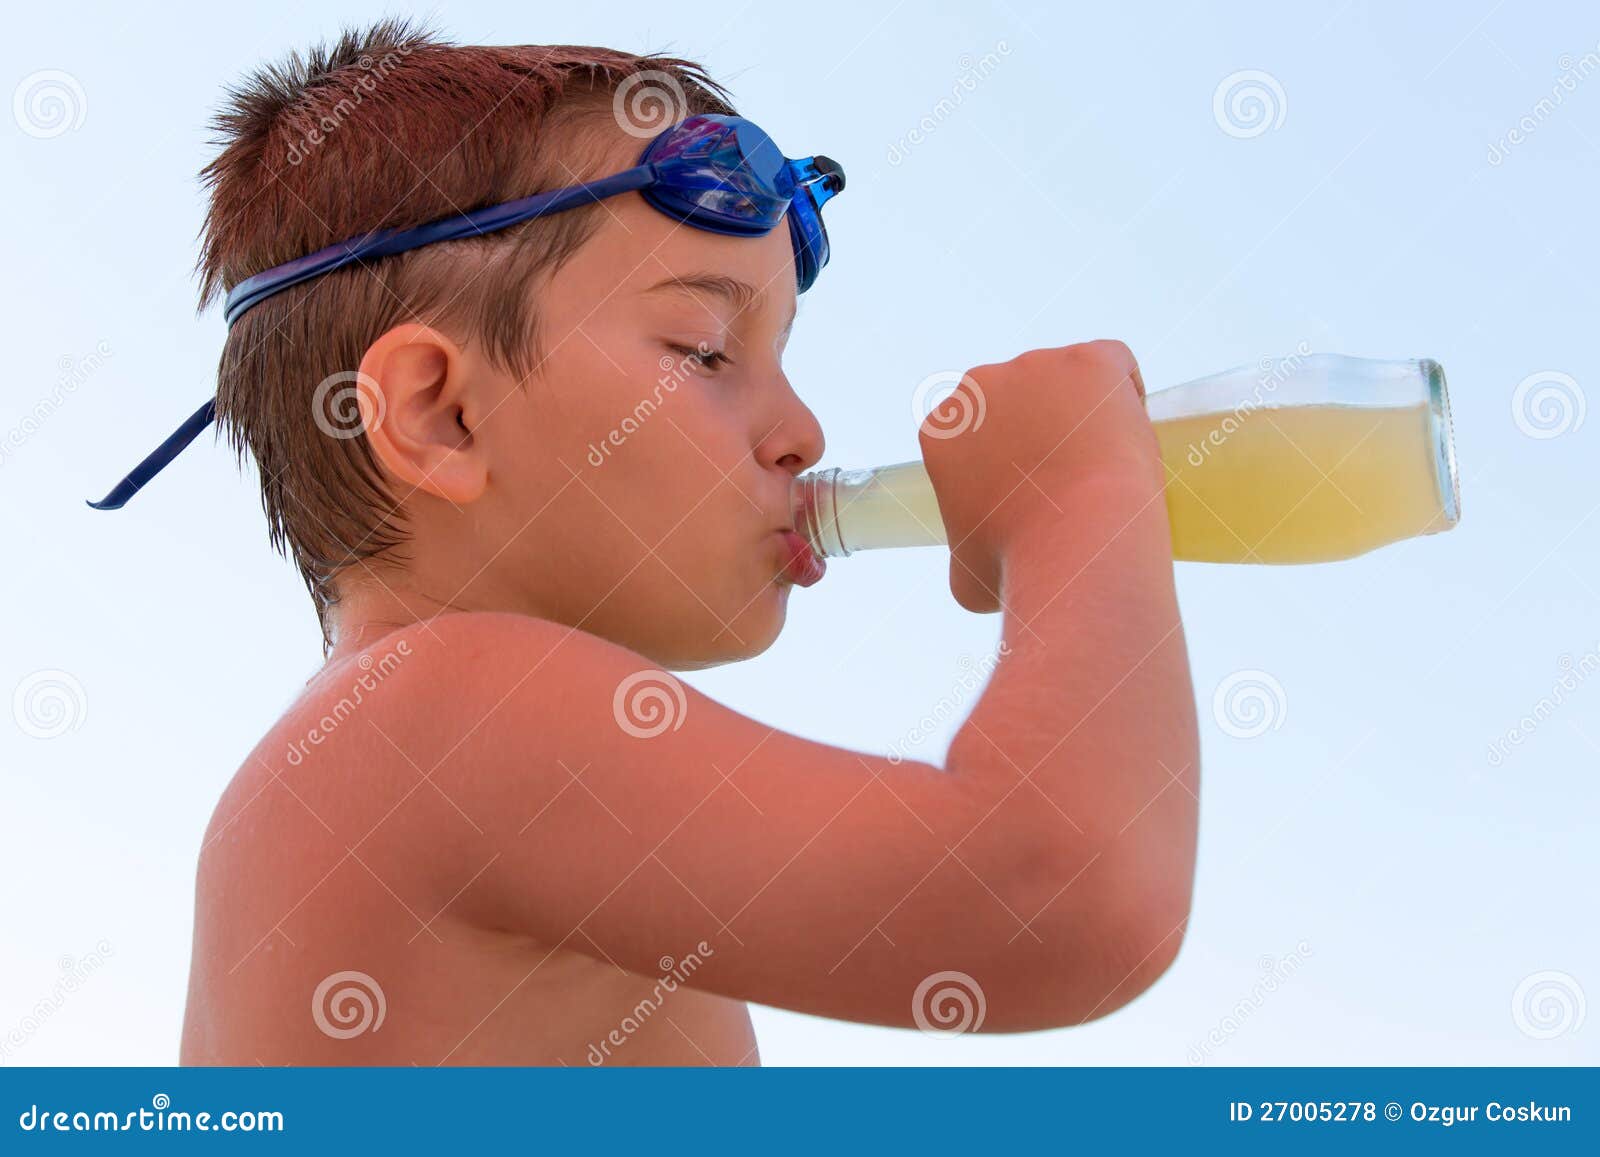 young boy slaking his thirst